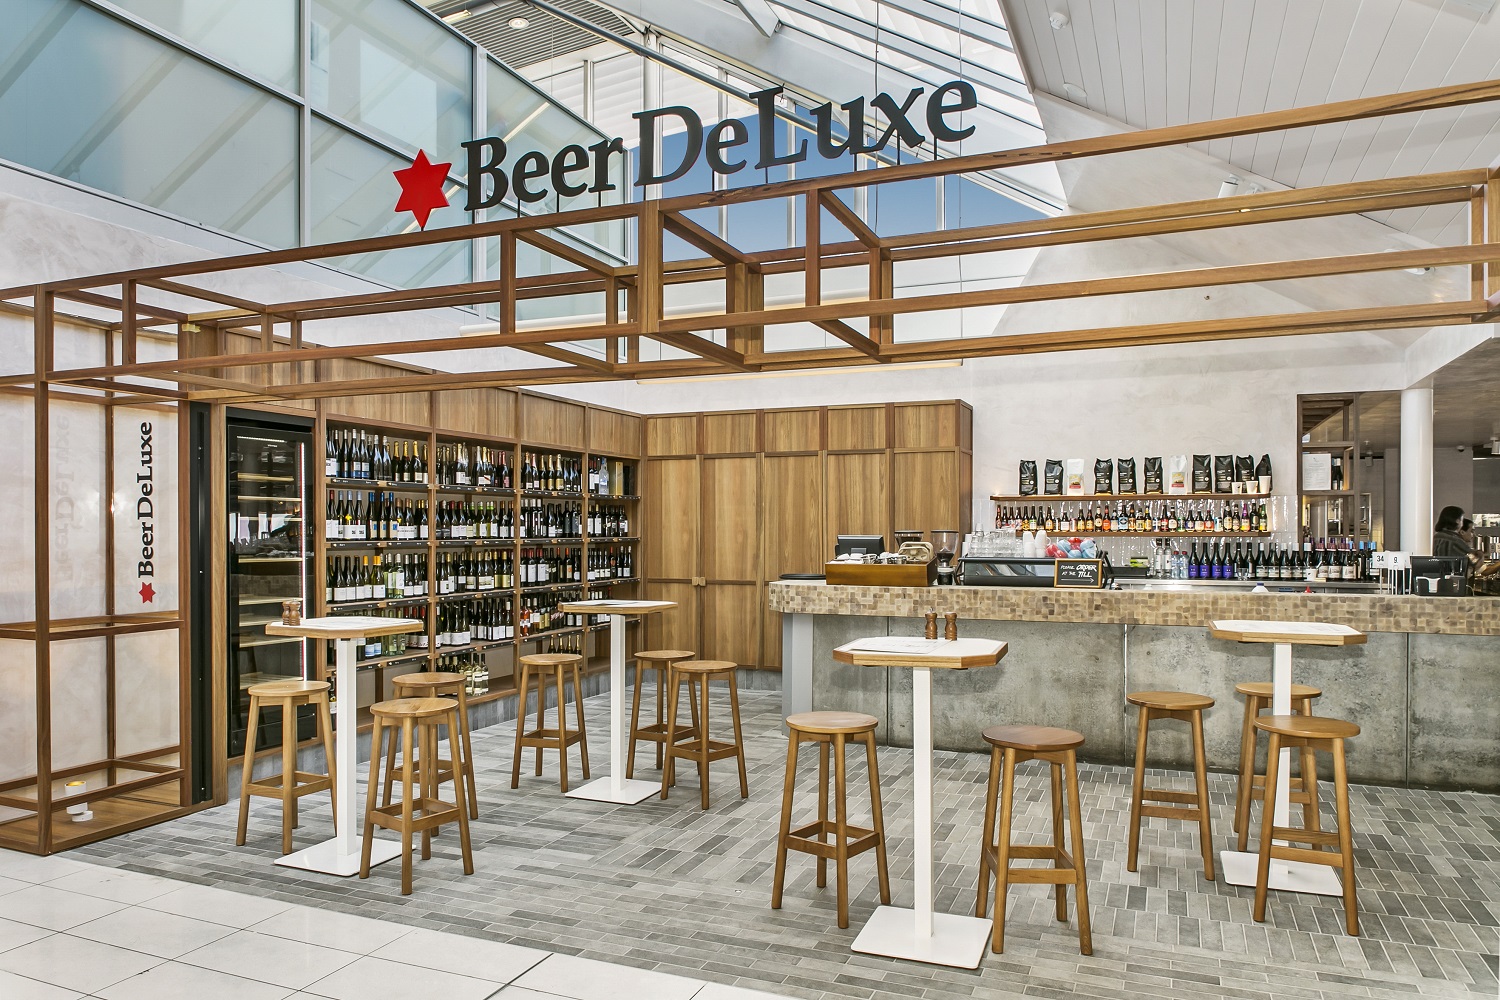 Sydney Airport unveils Beer DeLuxe at T2 Domestic terminal